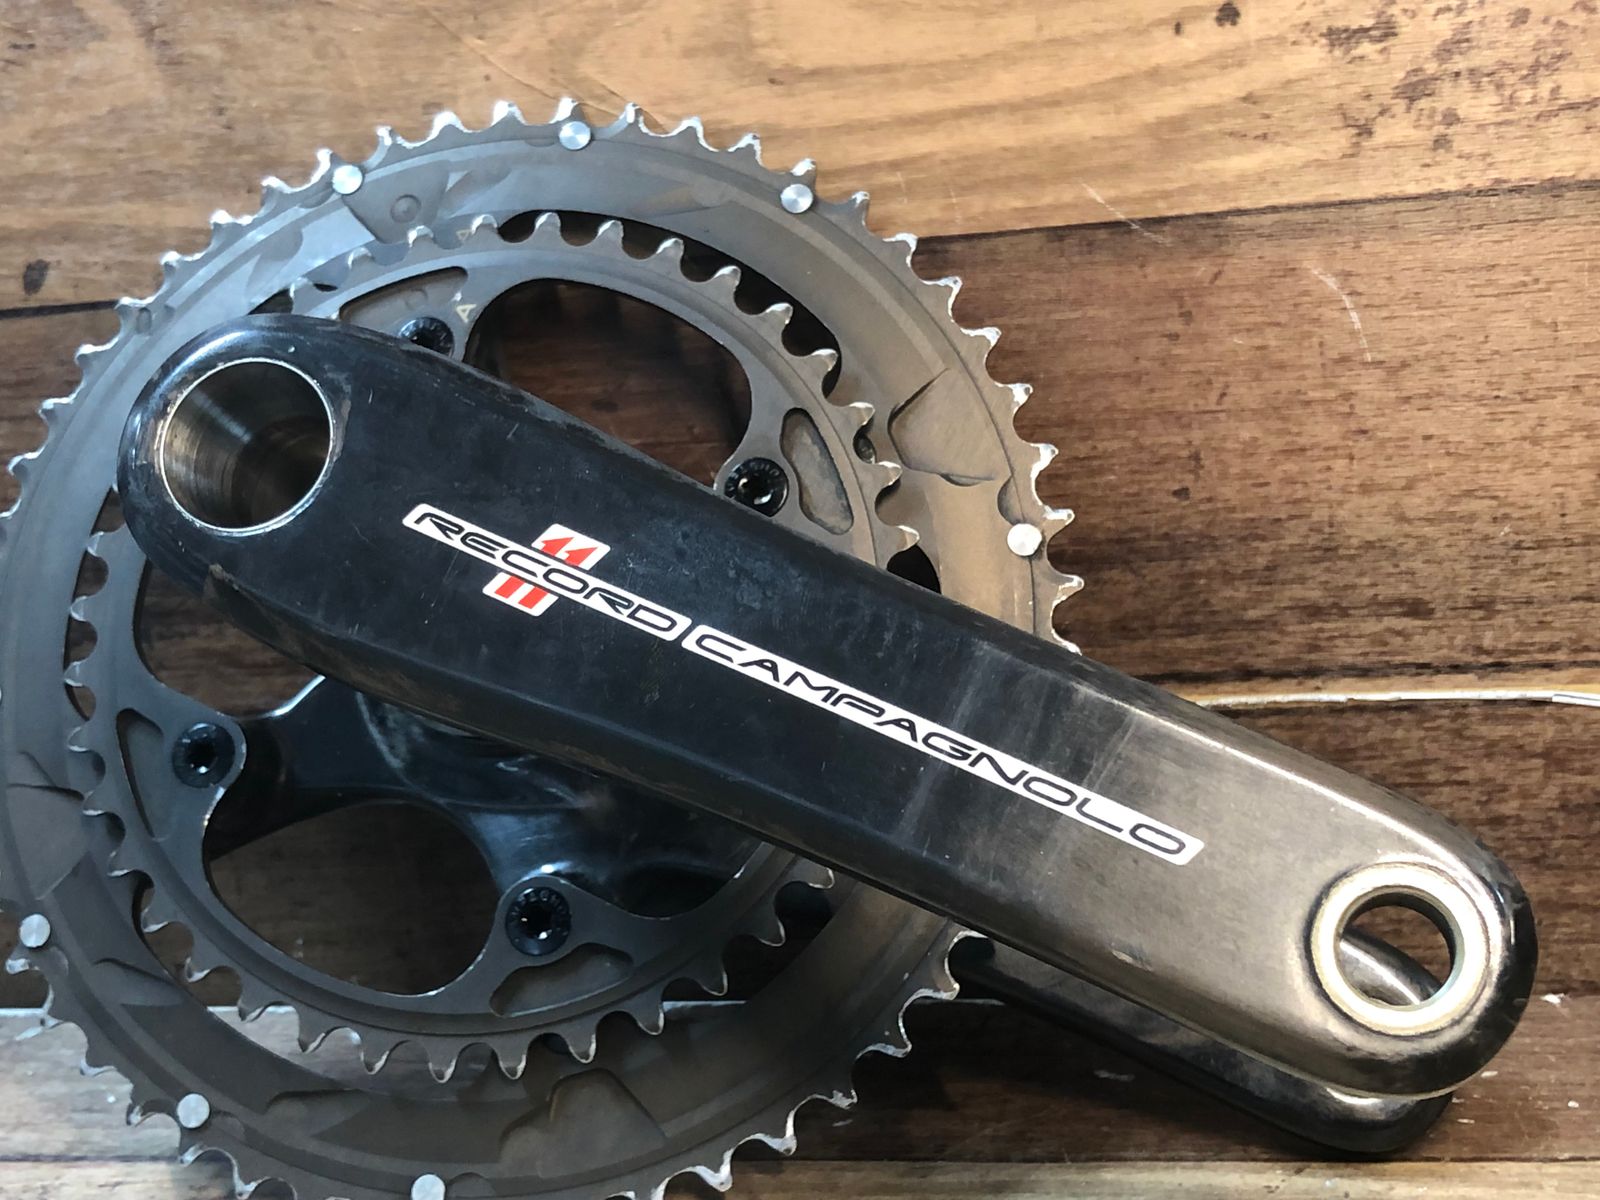 GT444 CAMPAGNOLO RECORD FC15-RE093C クランクセット 後期 11S 170mm 